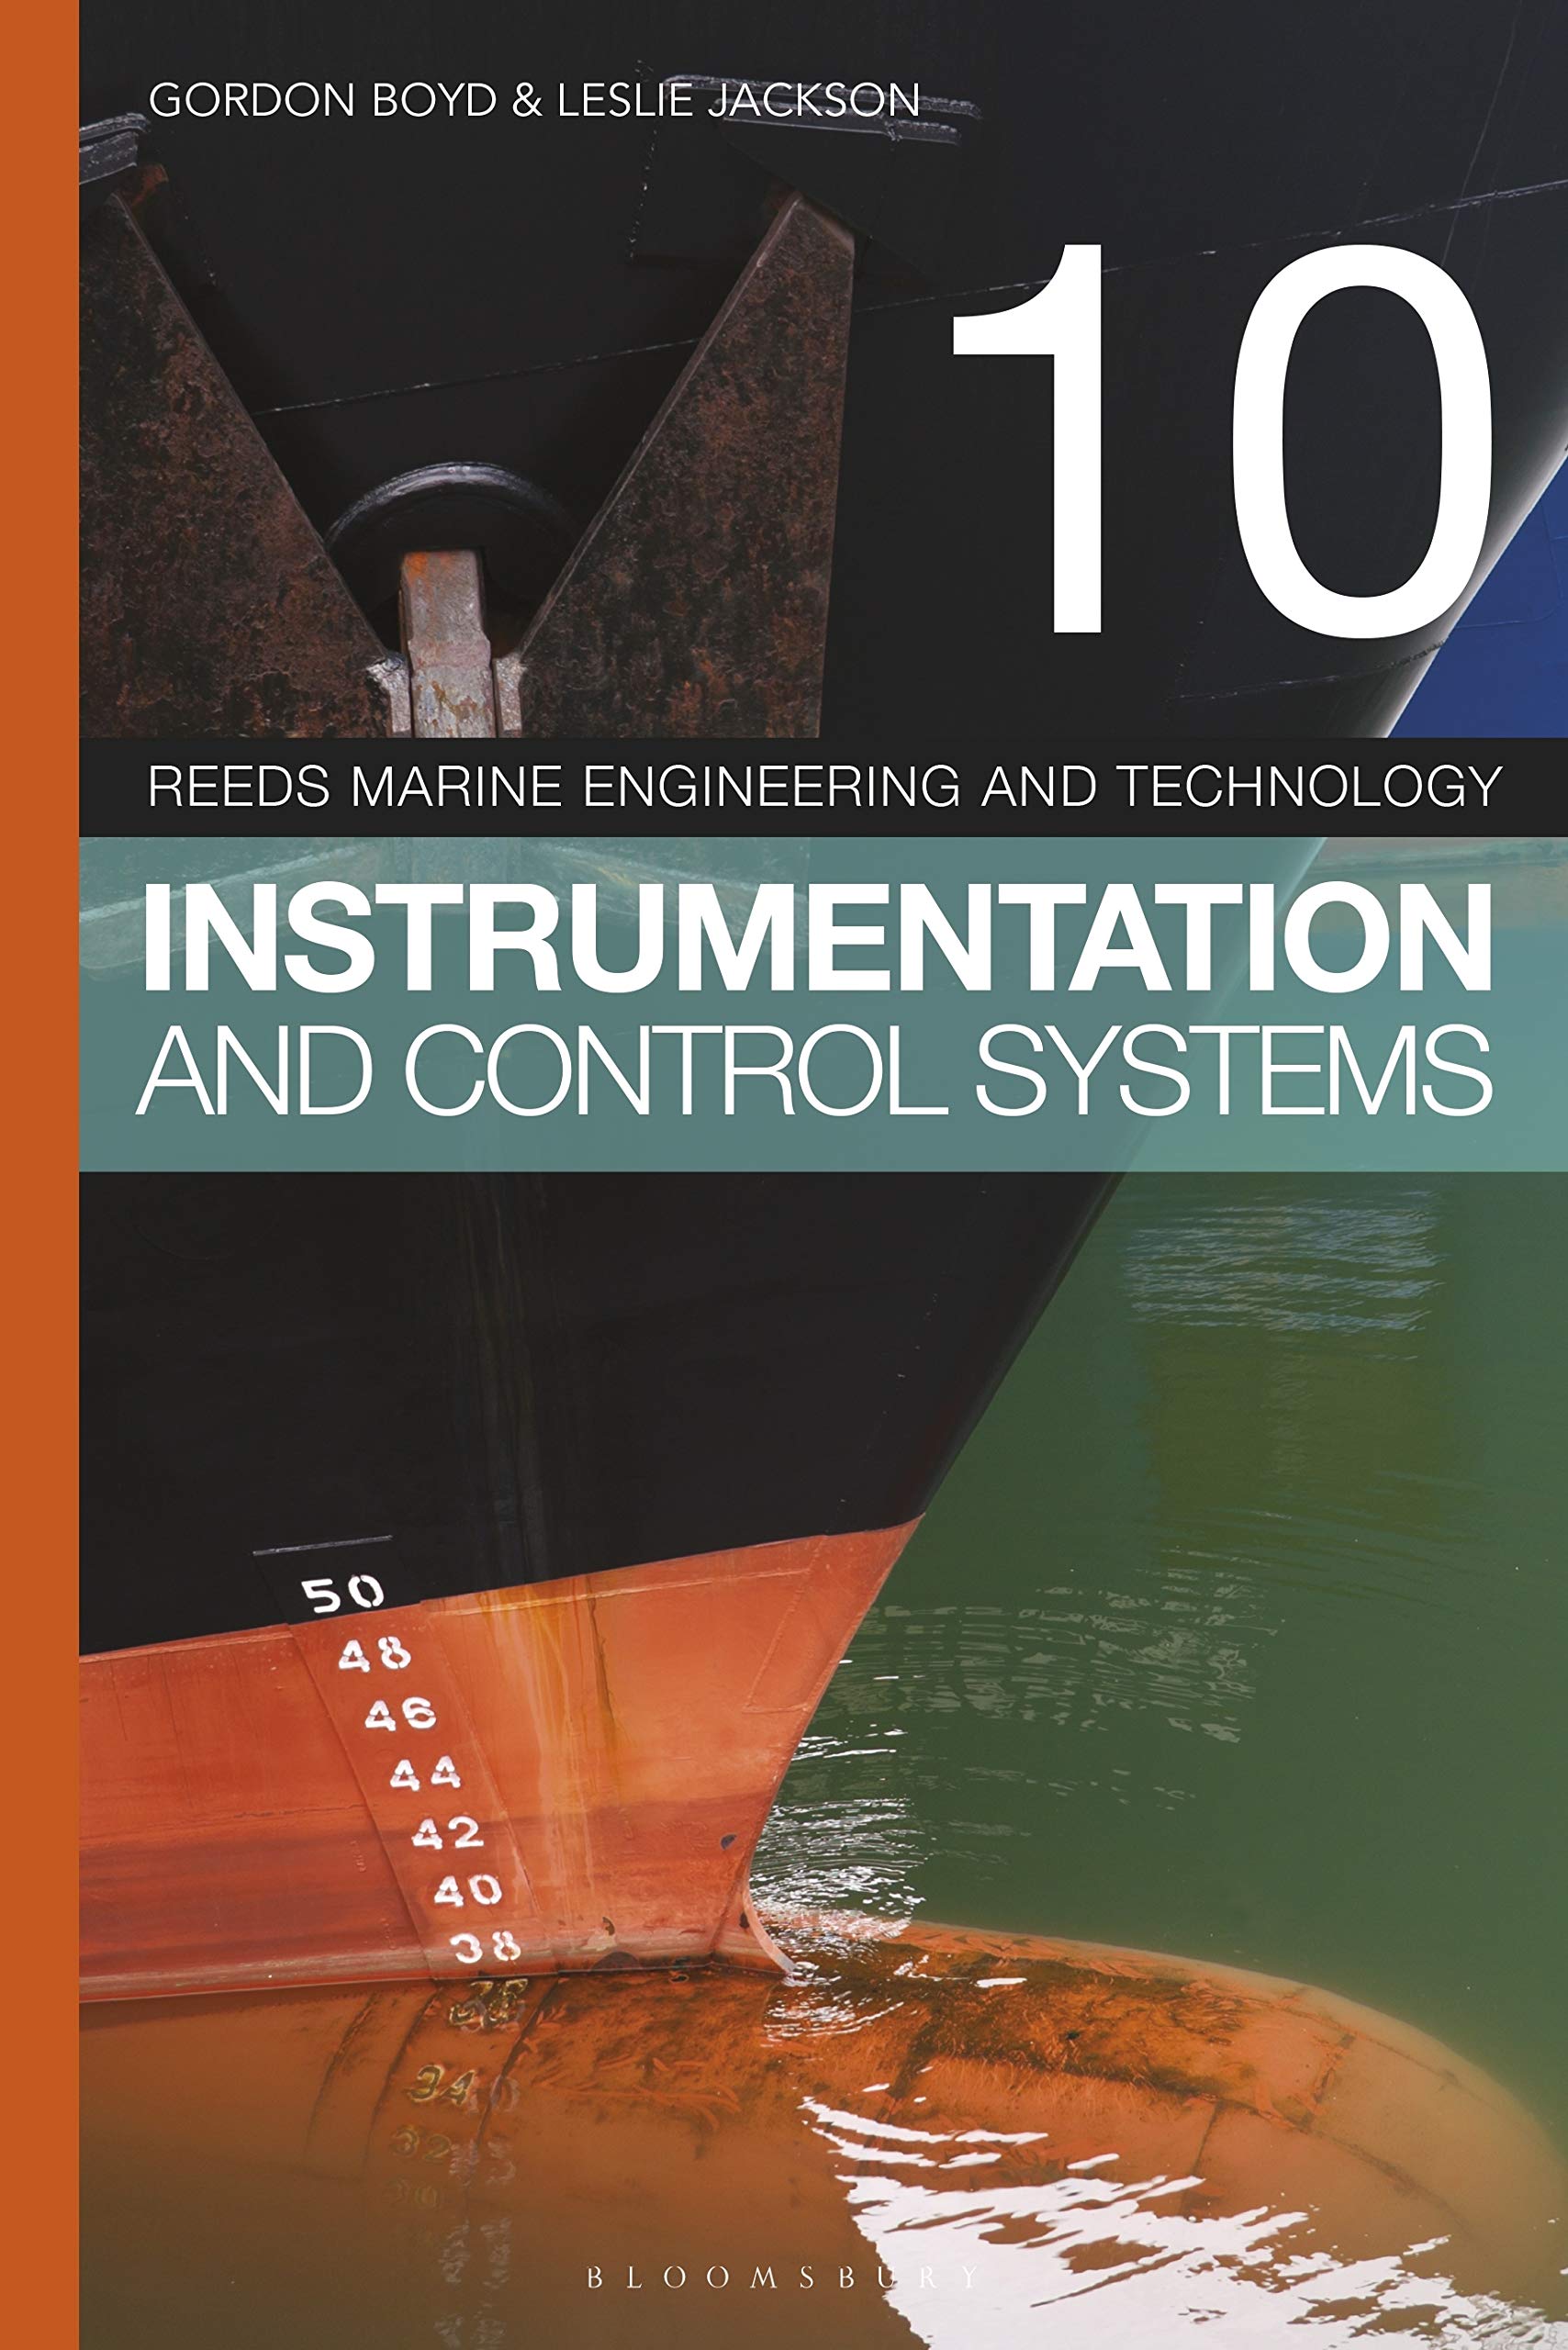 Reeds Marine Engineering And Technology 10  Instrumentation And Control Systems (Bloomsbury Publishing)